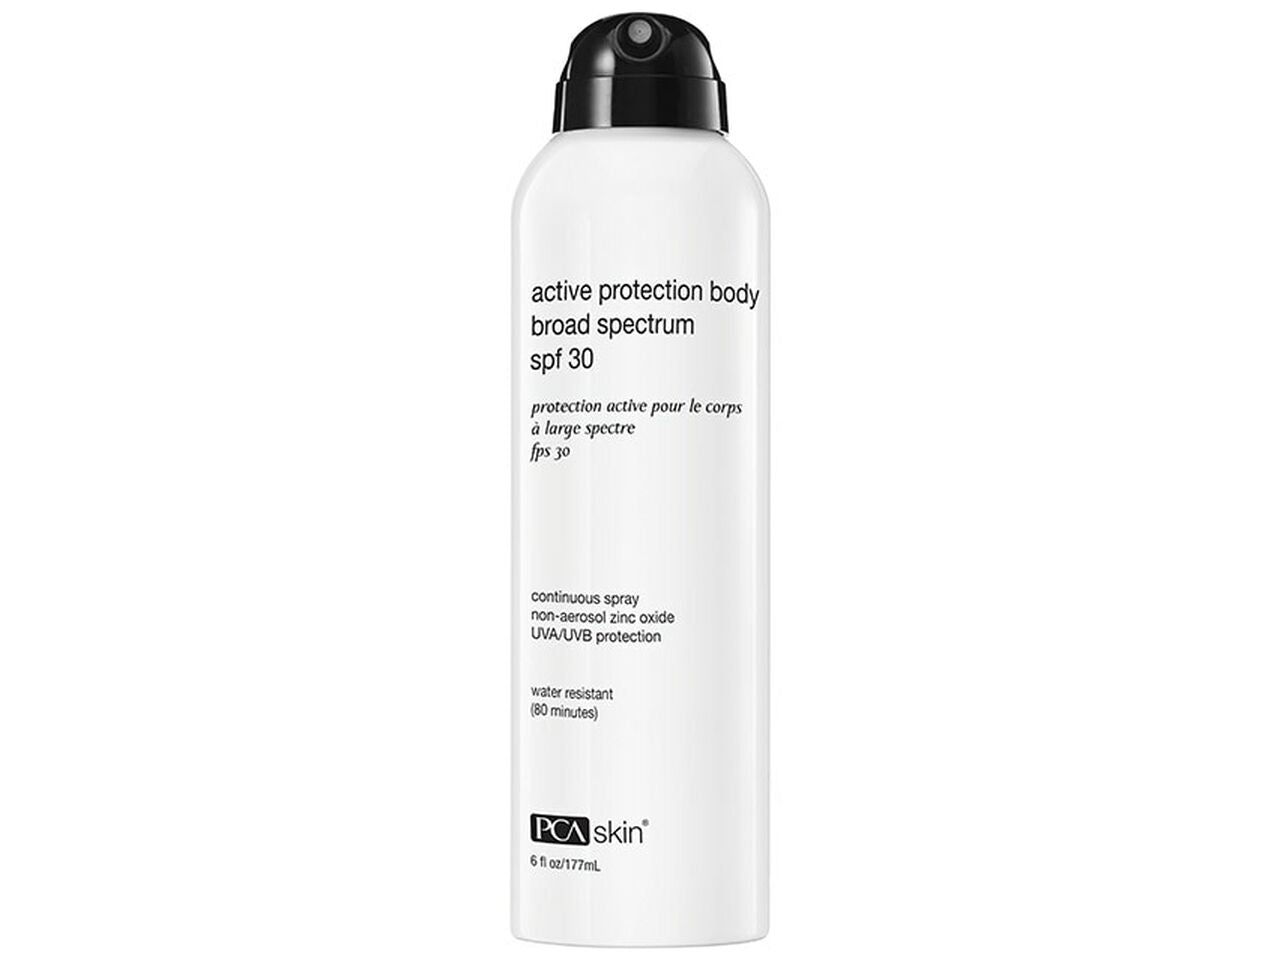 PCA Skin Active Protection Body SPF 30